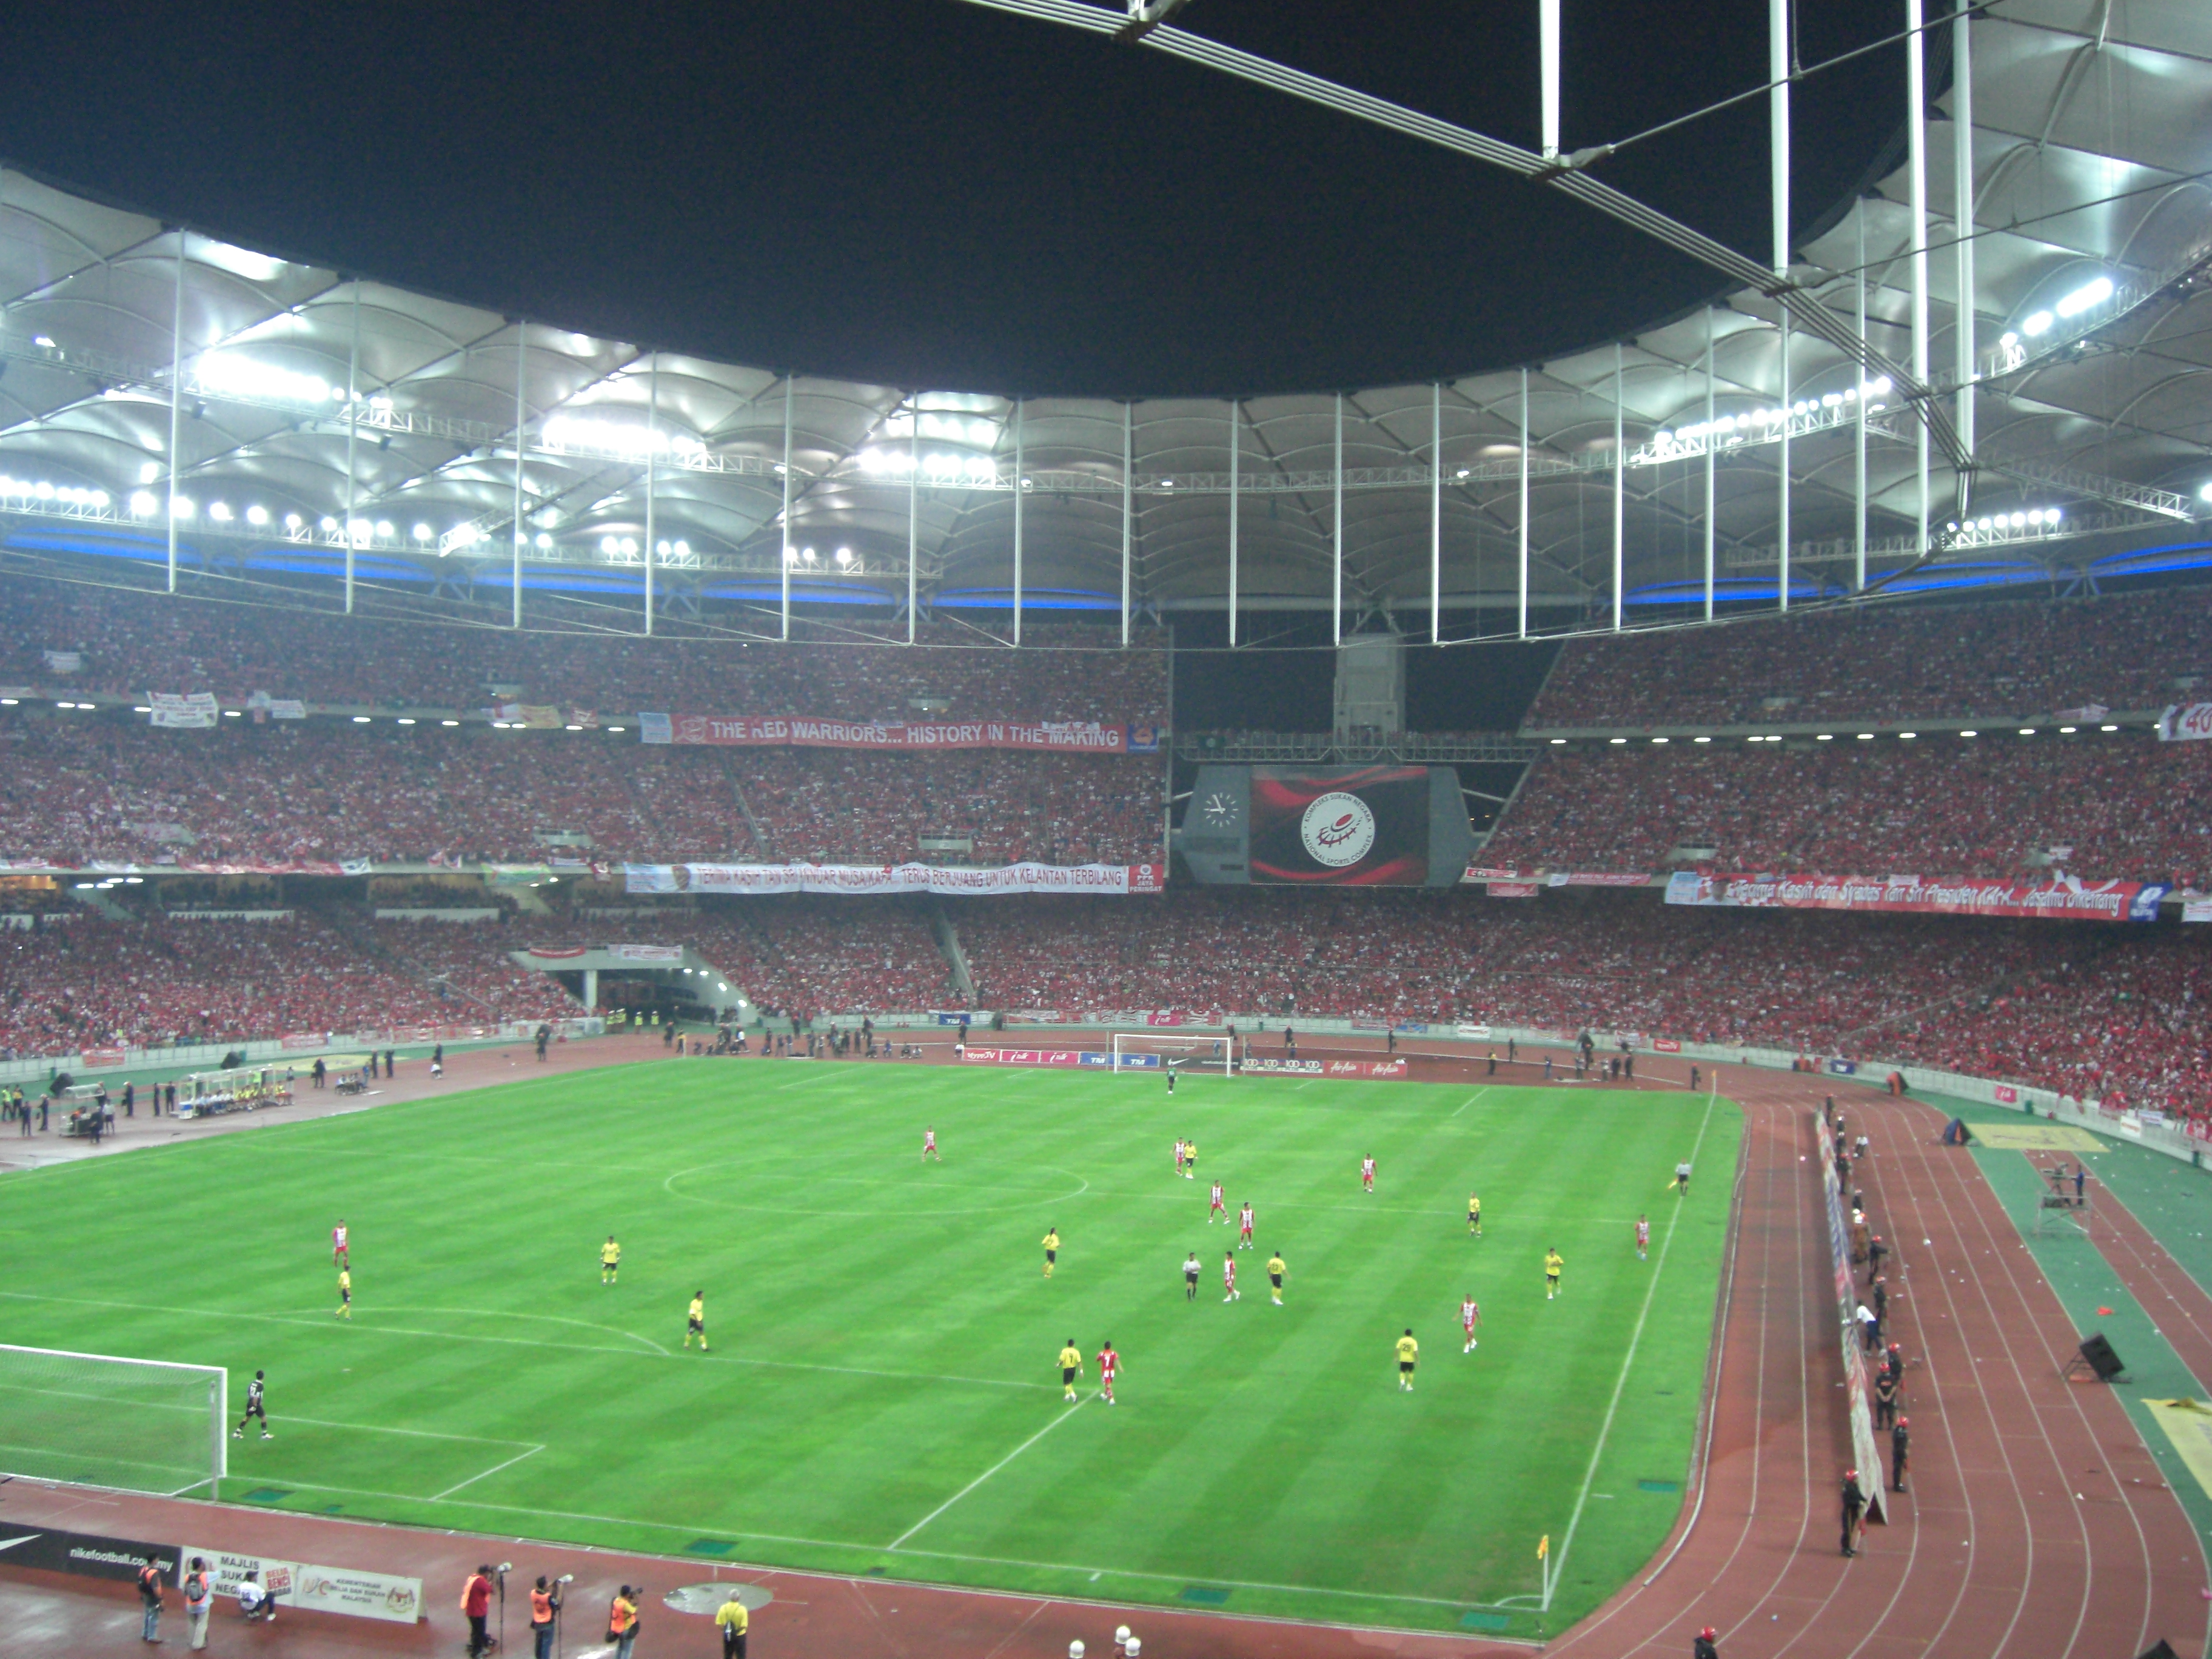 Stadium nasional bukit jalil - Football Betting Tips - How To Create Wise Bets